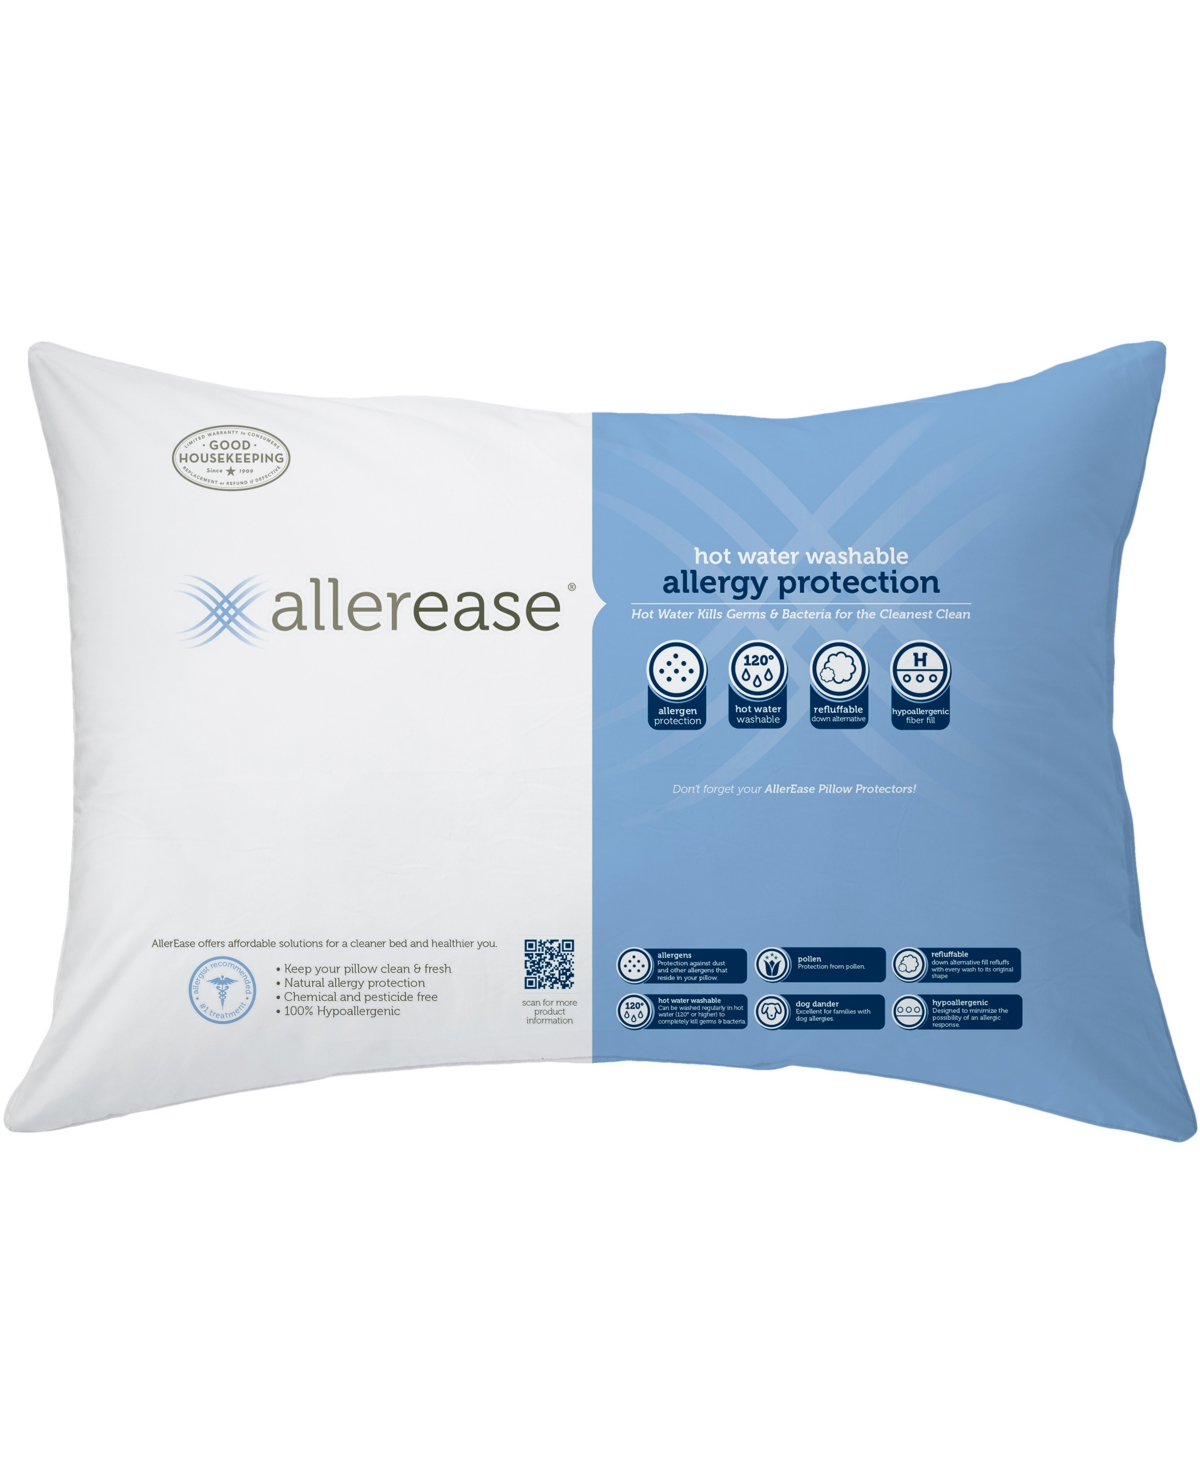 AllerEase Hot Water Wash Extra Firm Density Standard Pillow